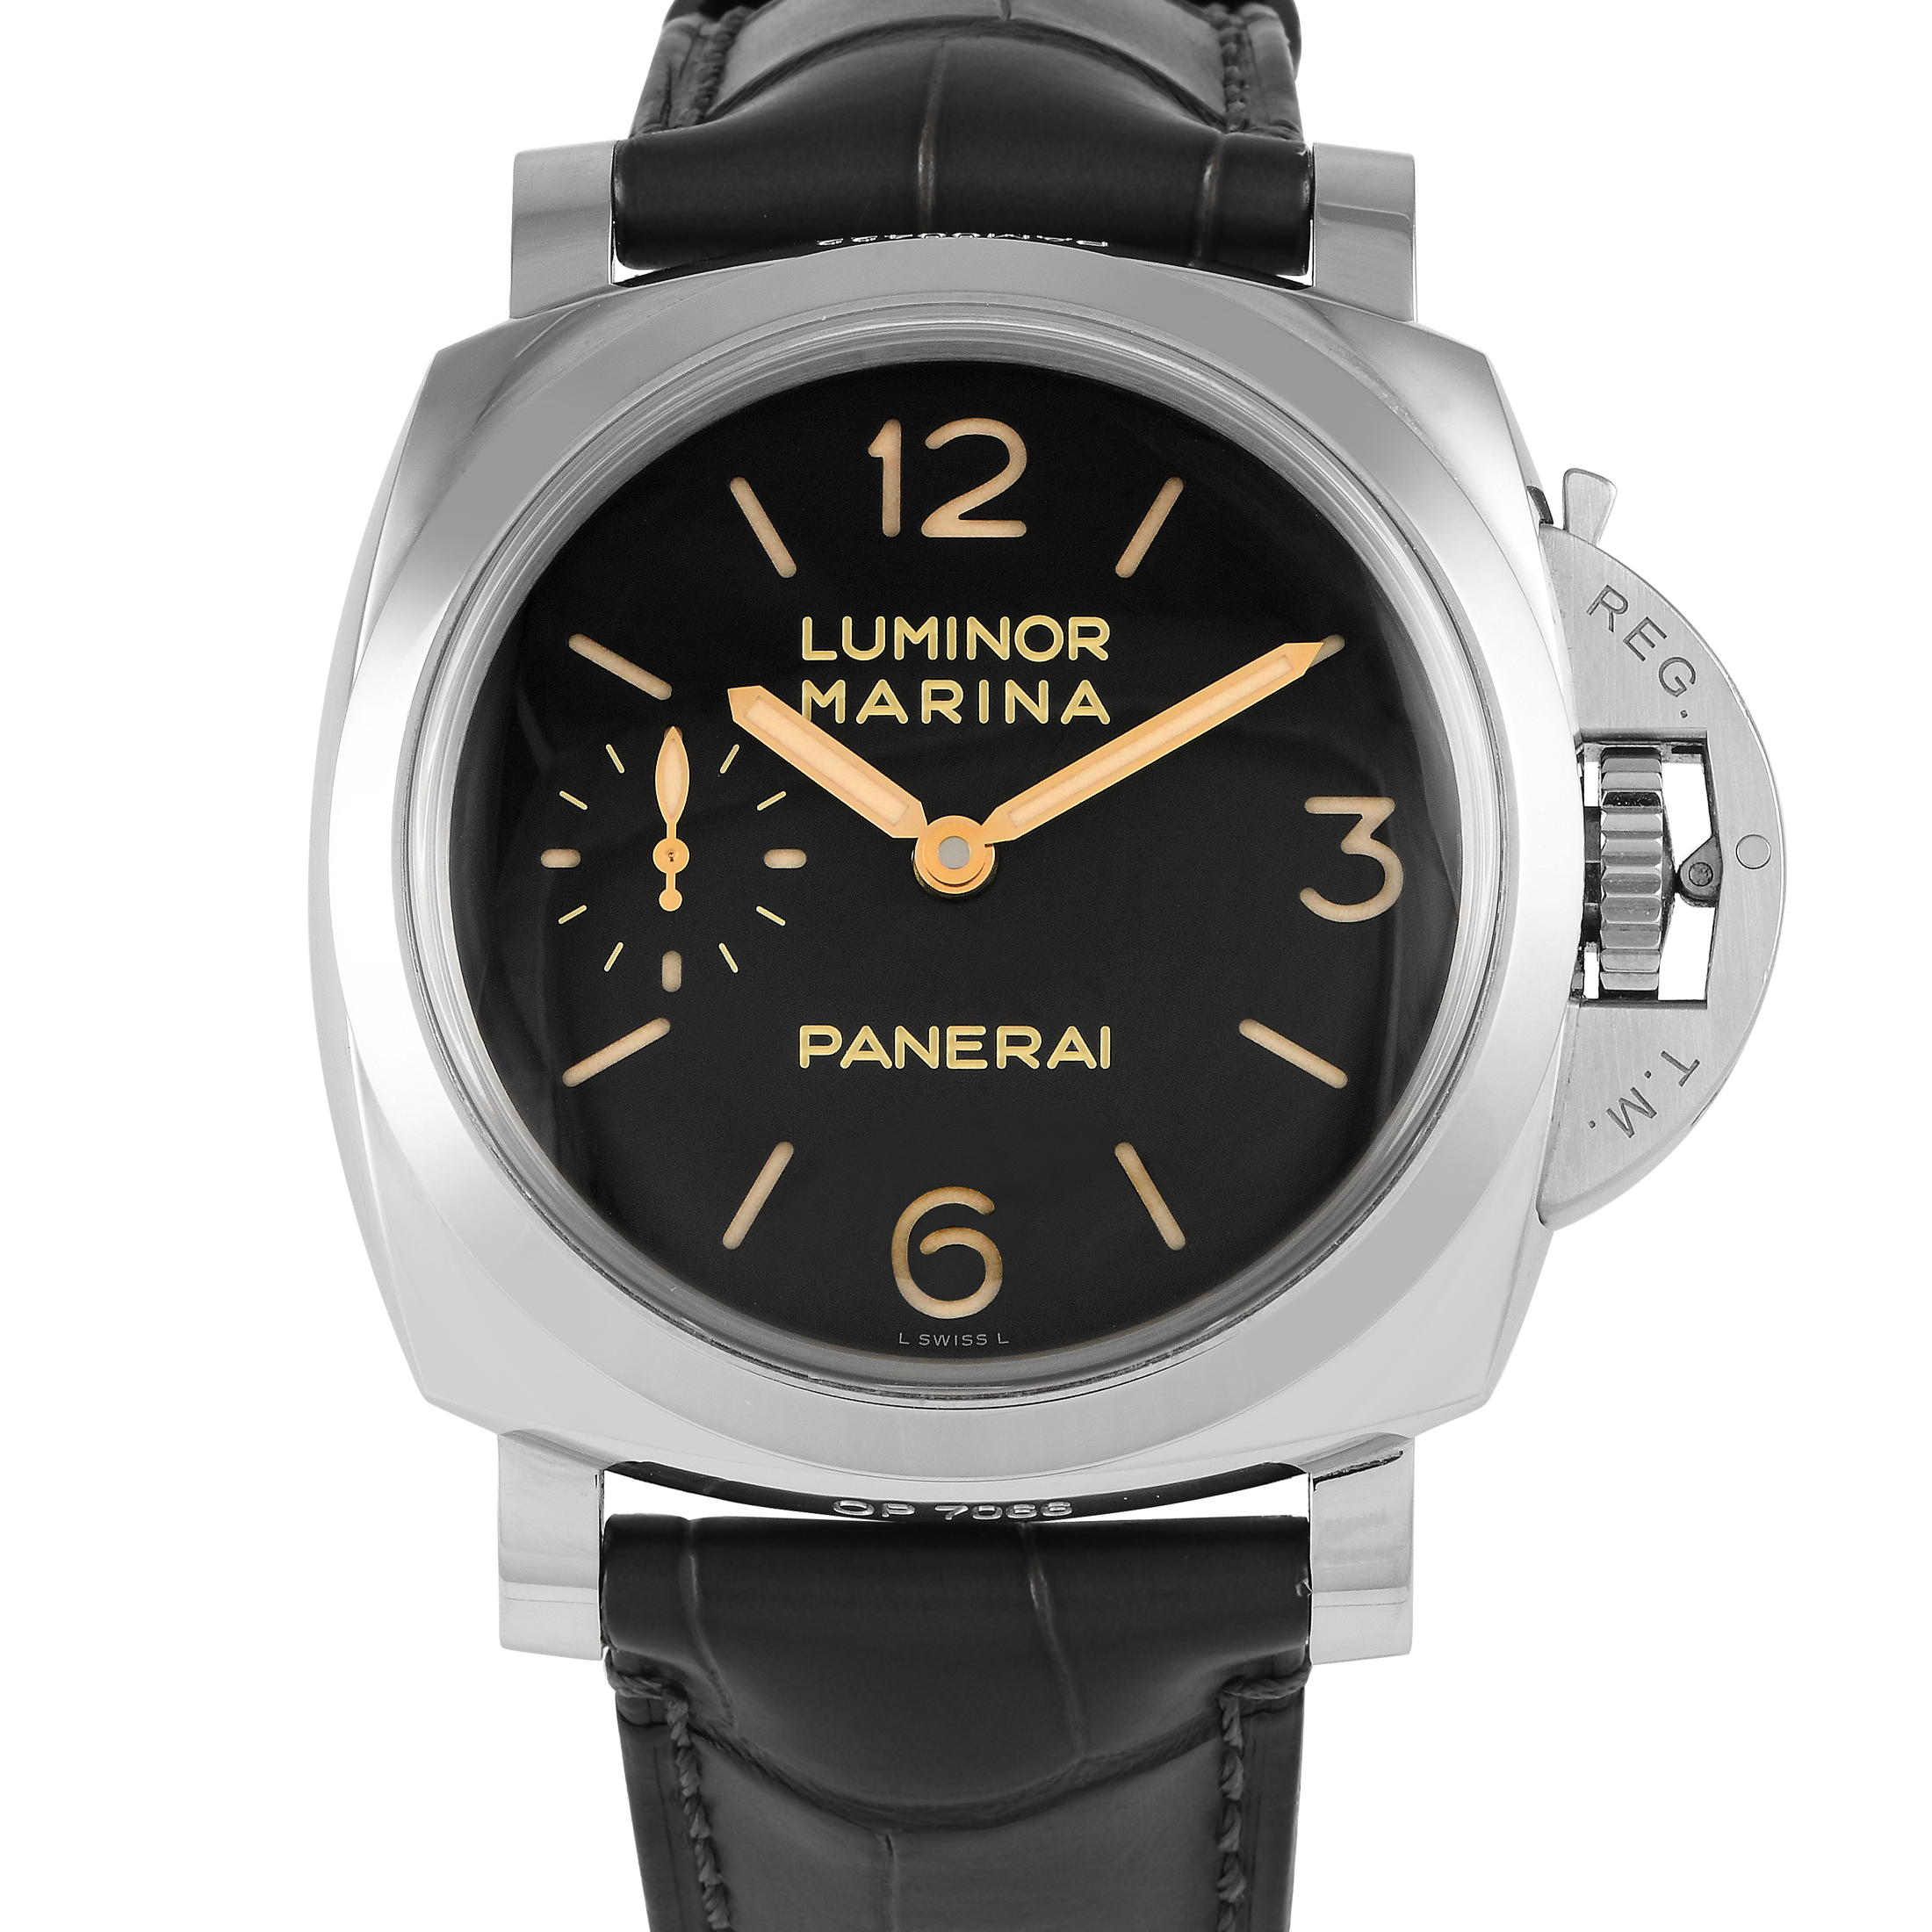 Review: A Panerai limited-edition luxury watch, of which there is only one  in India